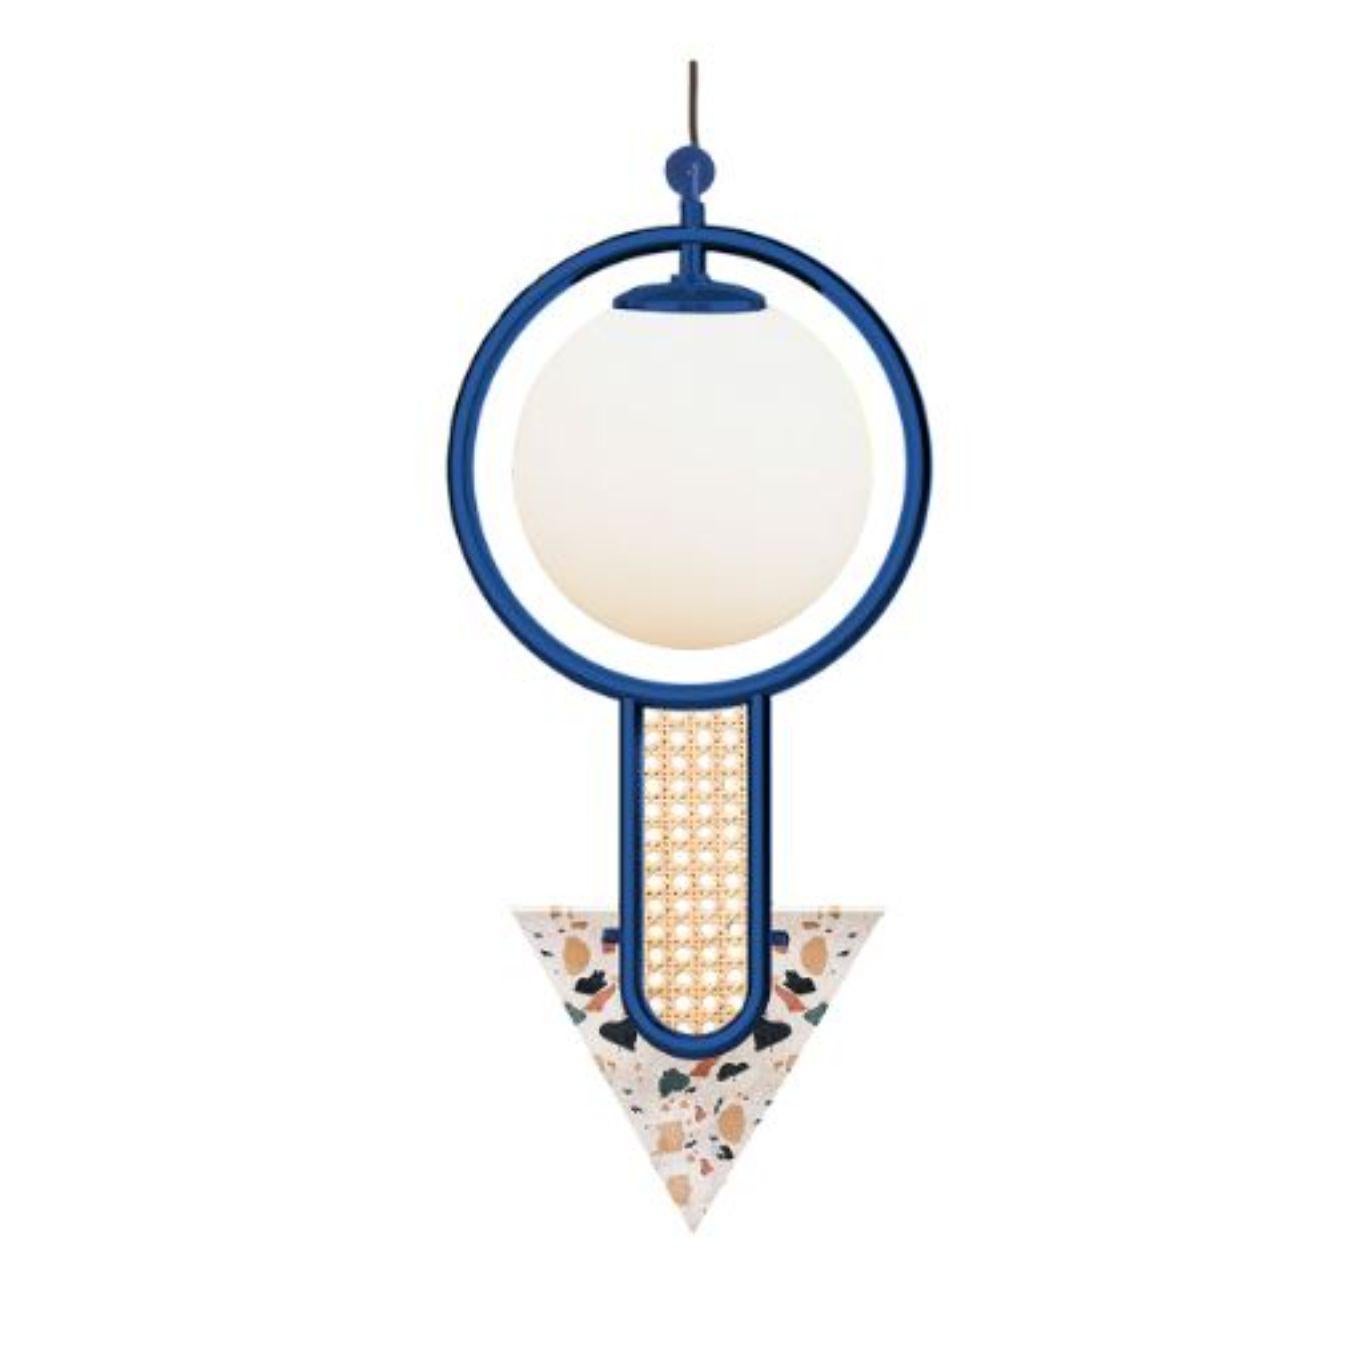 Frame II triangular suspension lamp by Dooq
Dimensions: W 28 x D 18 x H 54 cm
Materials: lacquered metal, rattan, terrazzo.
Also available in different colours and dimensions.

Information:
230V/50Hz
1 x max. G9
4W LED

120V/60Hz
1 x max.